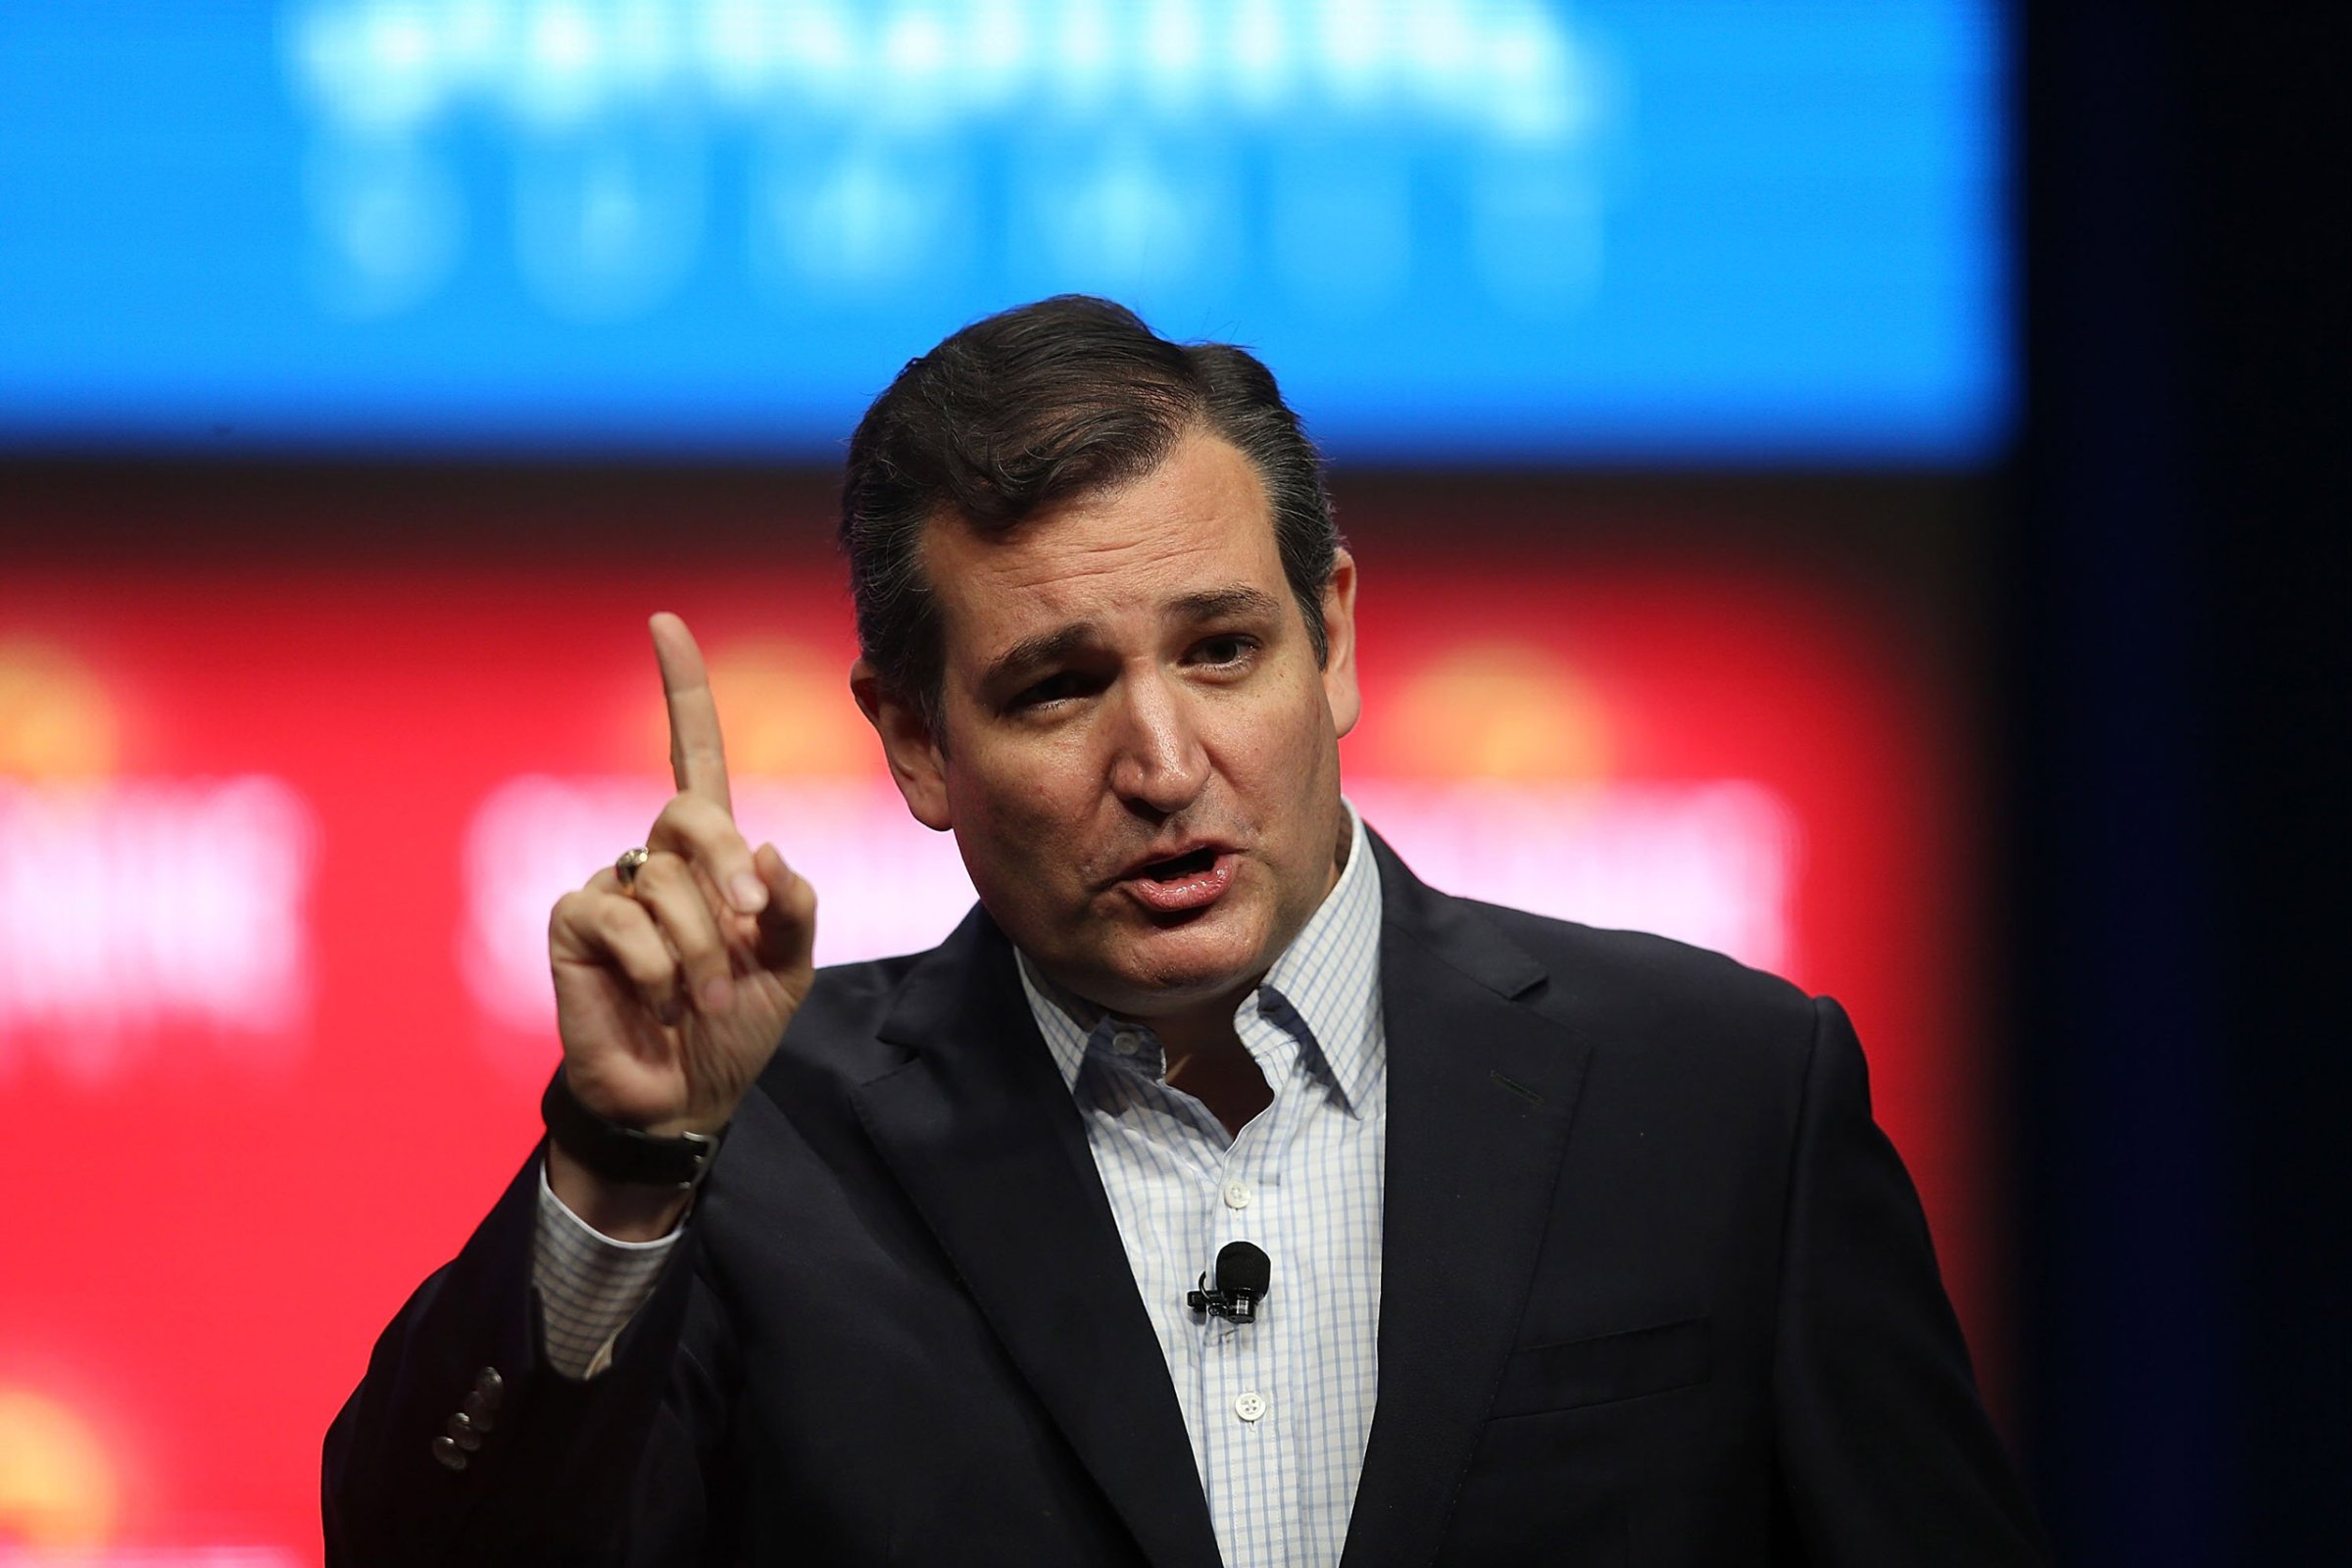 ORLANDO, FL - NOVEMBER 13: Republican presidential candidate Sen. Ted Cruz (R-TX) speaks during the Sunshine Summit conference being held at the Rosen Shingle Creek on November 13, 2015 in Orlando, Florida. The summit brought Republican presidential candidates in front of the Republican voters. (Photo by Joe Raedle/Getty Images)